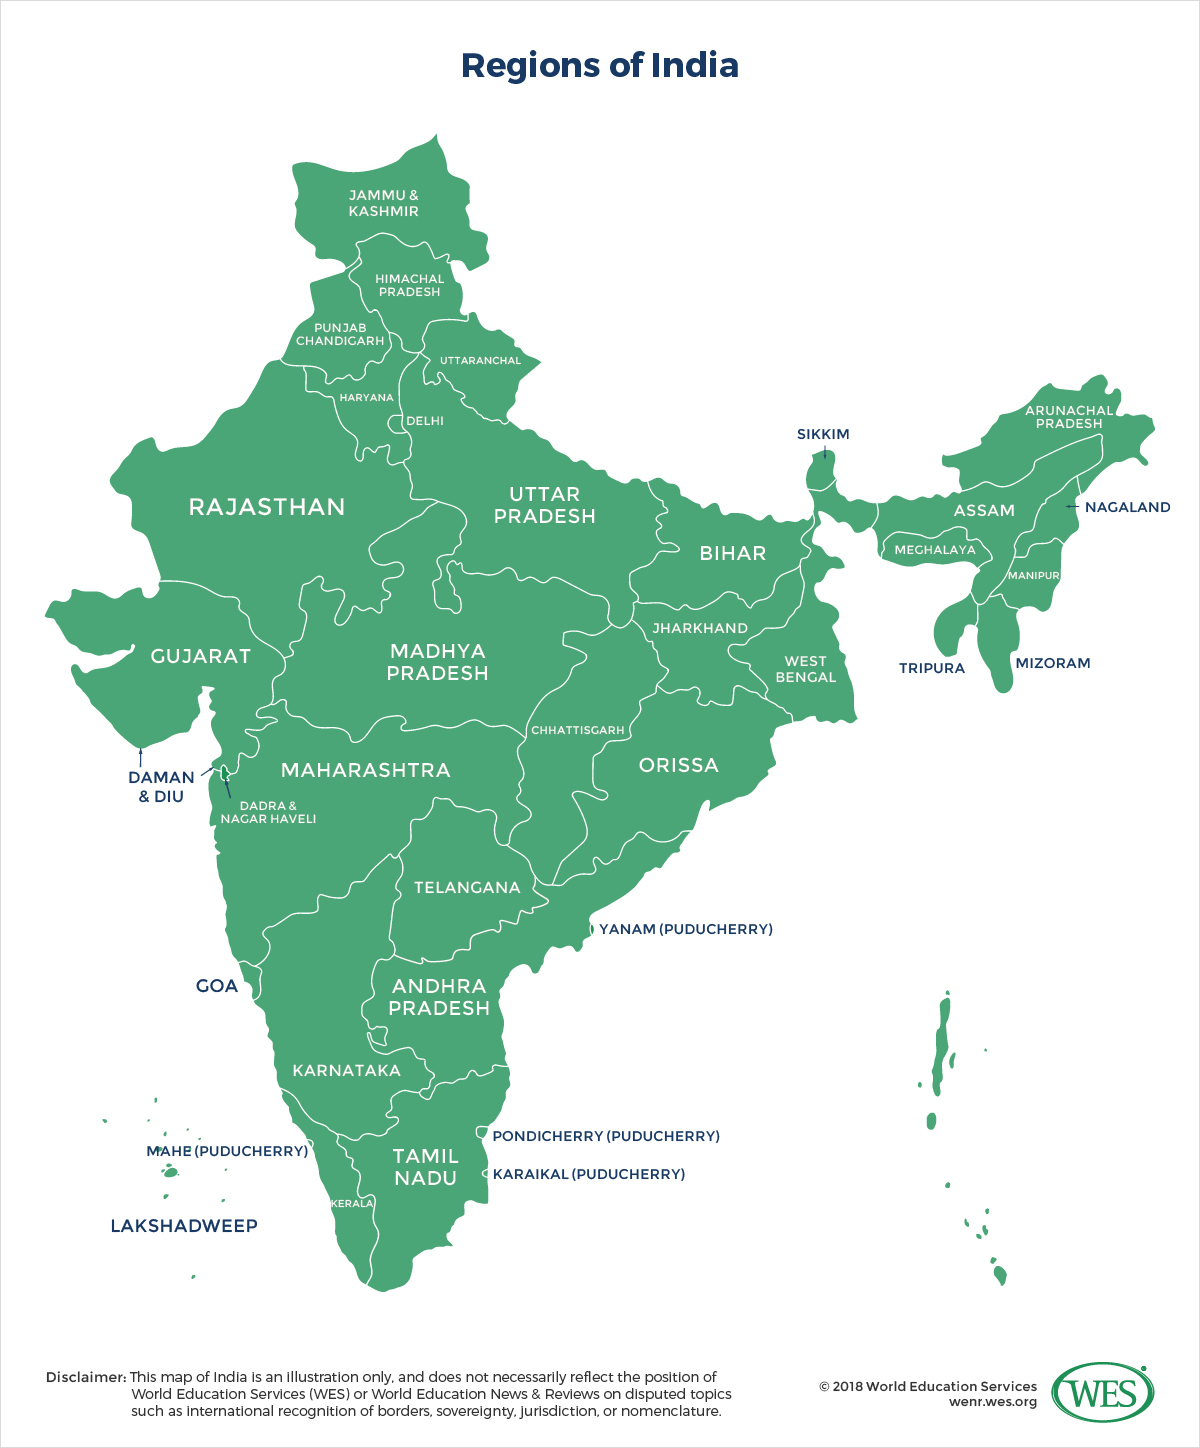 A map of the regions of India.